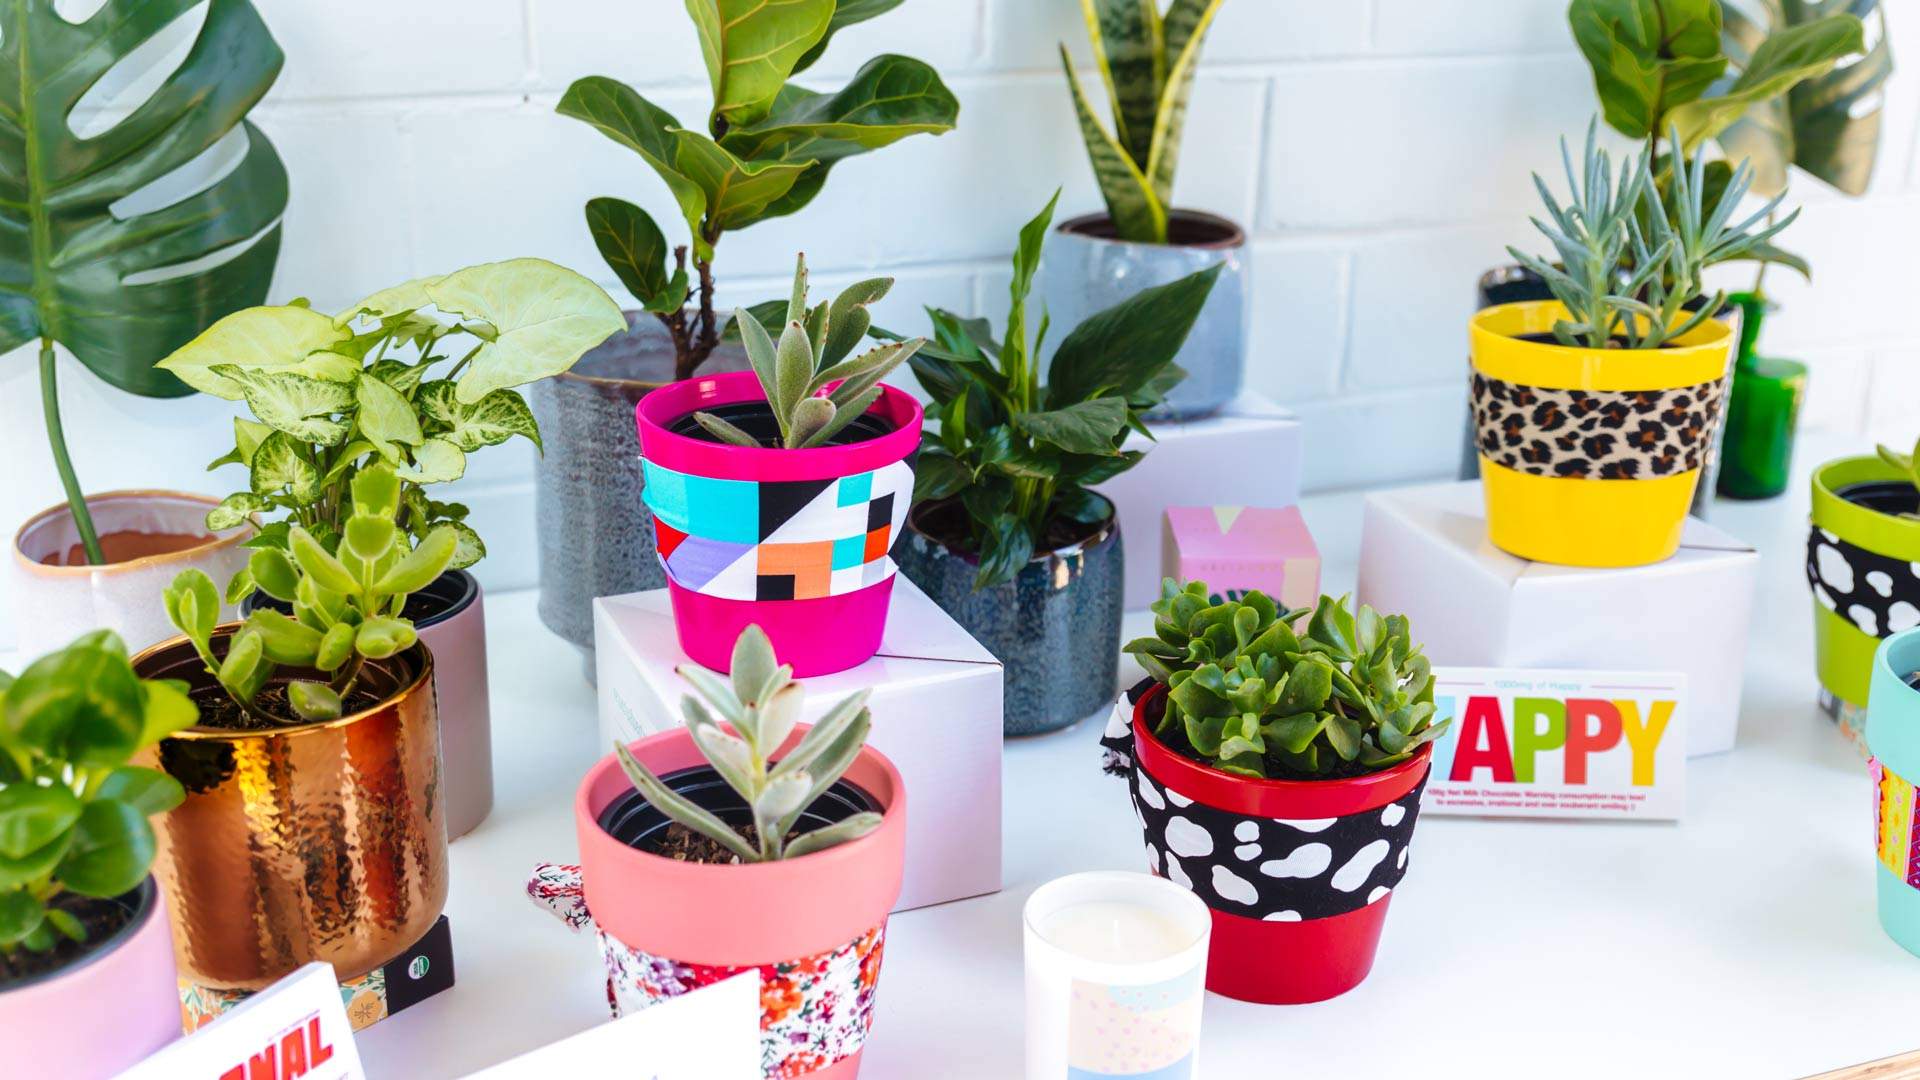 Sydney's Same-Day Plant Delivery Service Has Opened a Bricks-and-Mortar Shop in Marrickville